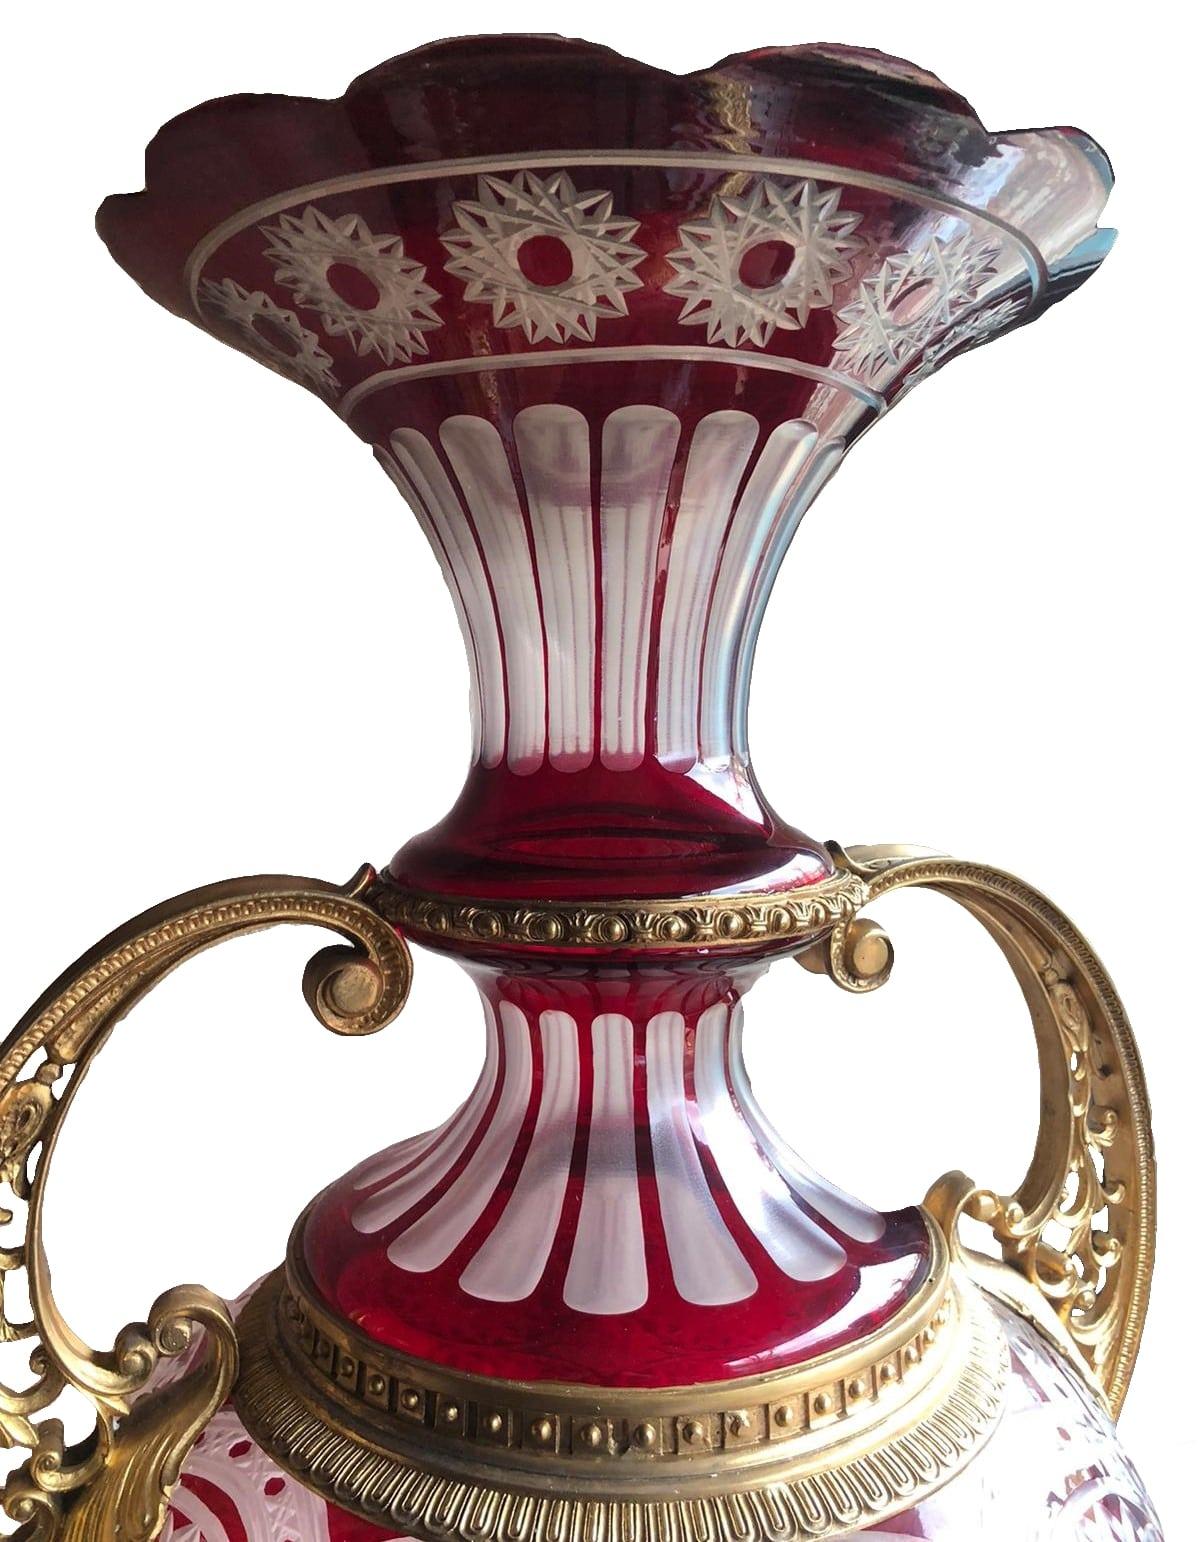 A pair of monumental Bohemain cut crystal ruby red vases in the manner of Moser. Gilt bronze and cut crystal vases perfect for gracing entrance halls or centre pieces. Solid cut crystal vases with ribboned tops accompanied with heavy gold gilding